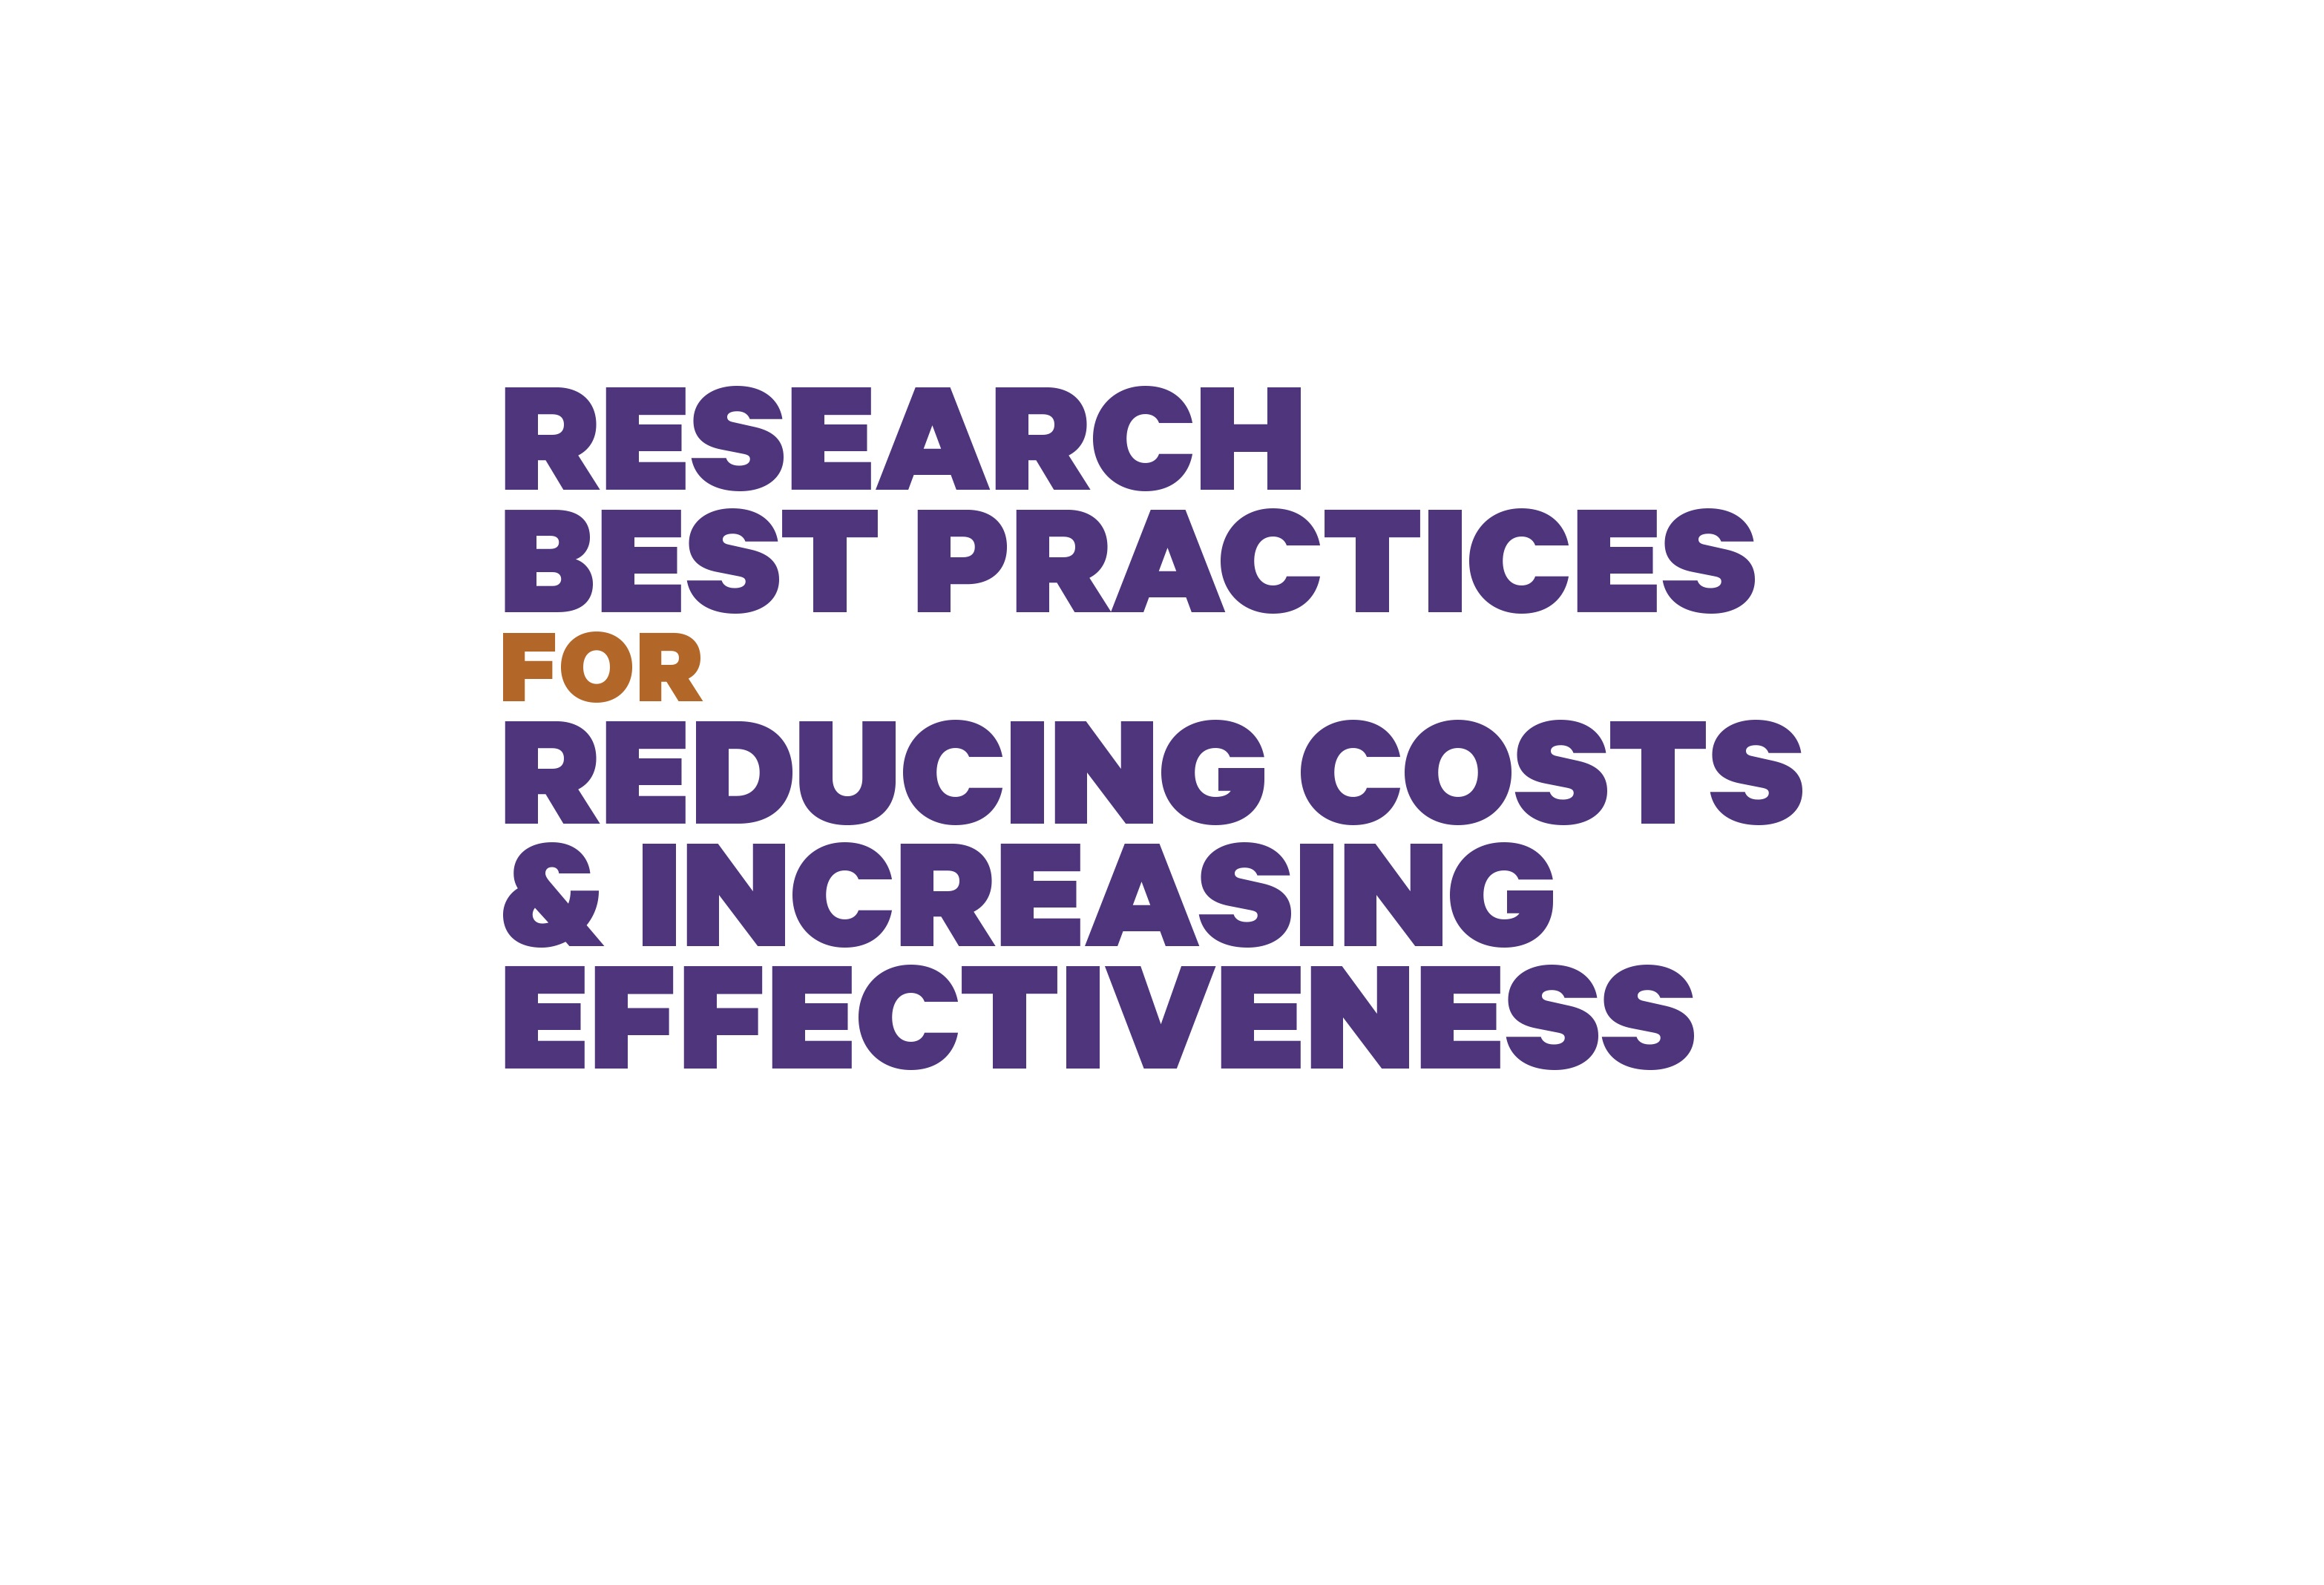 Cover image for  article: Five B2B Best Practices for Corporate Research